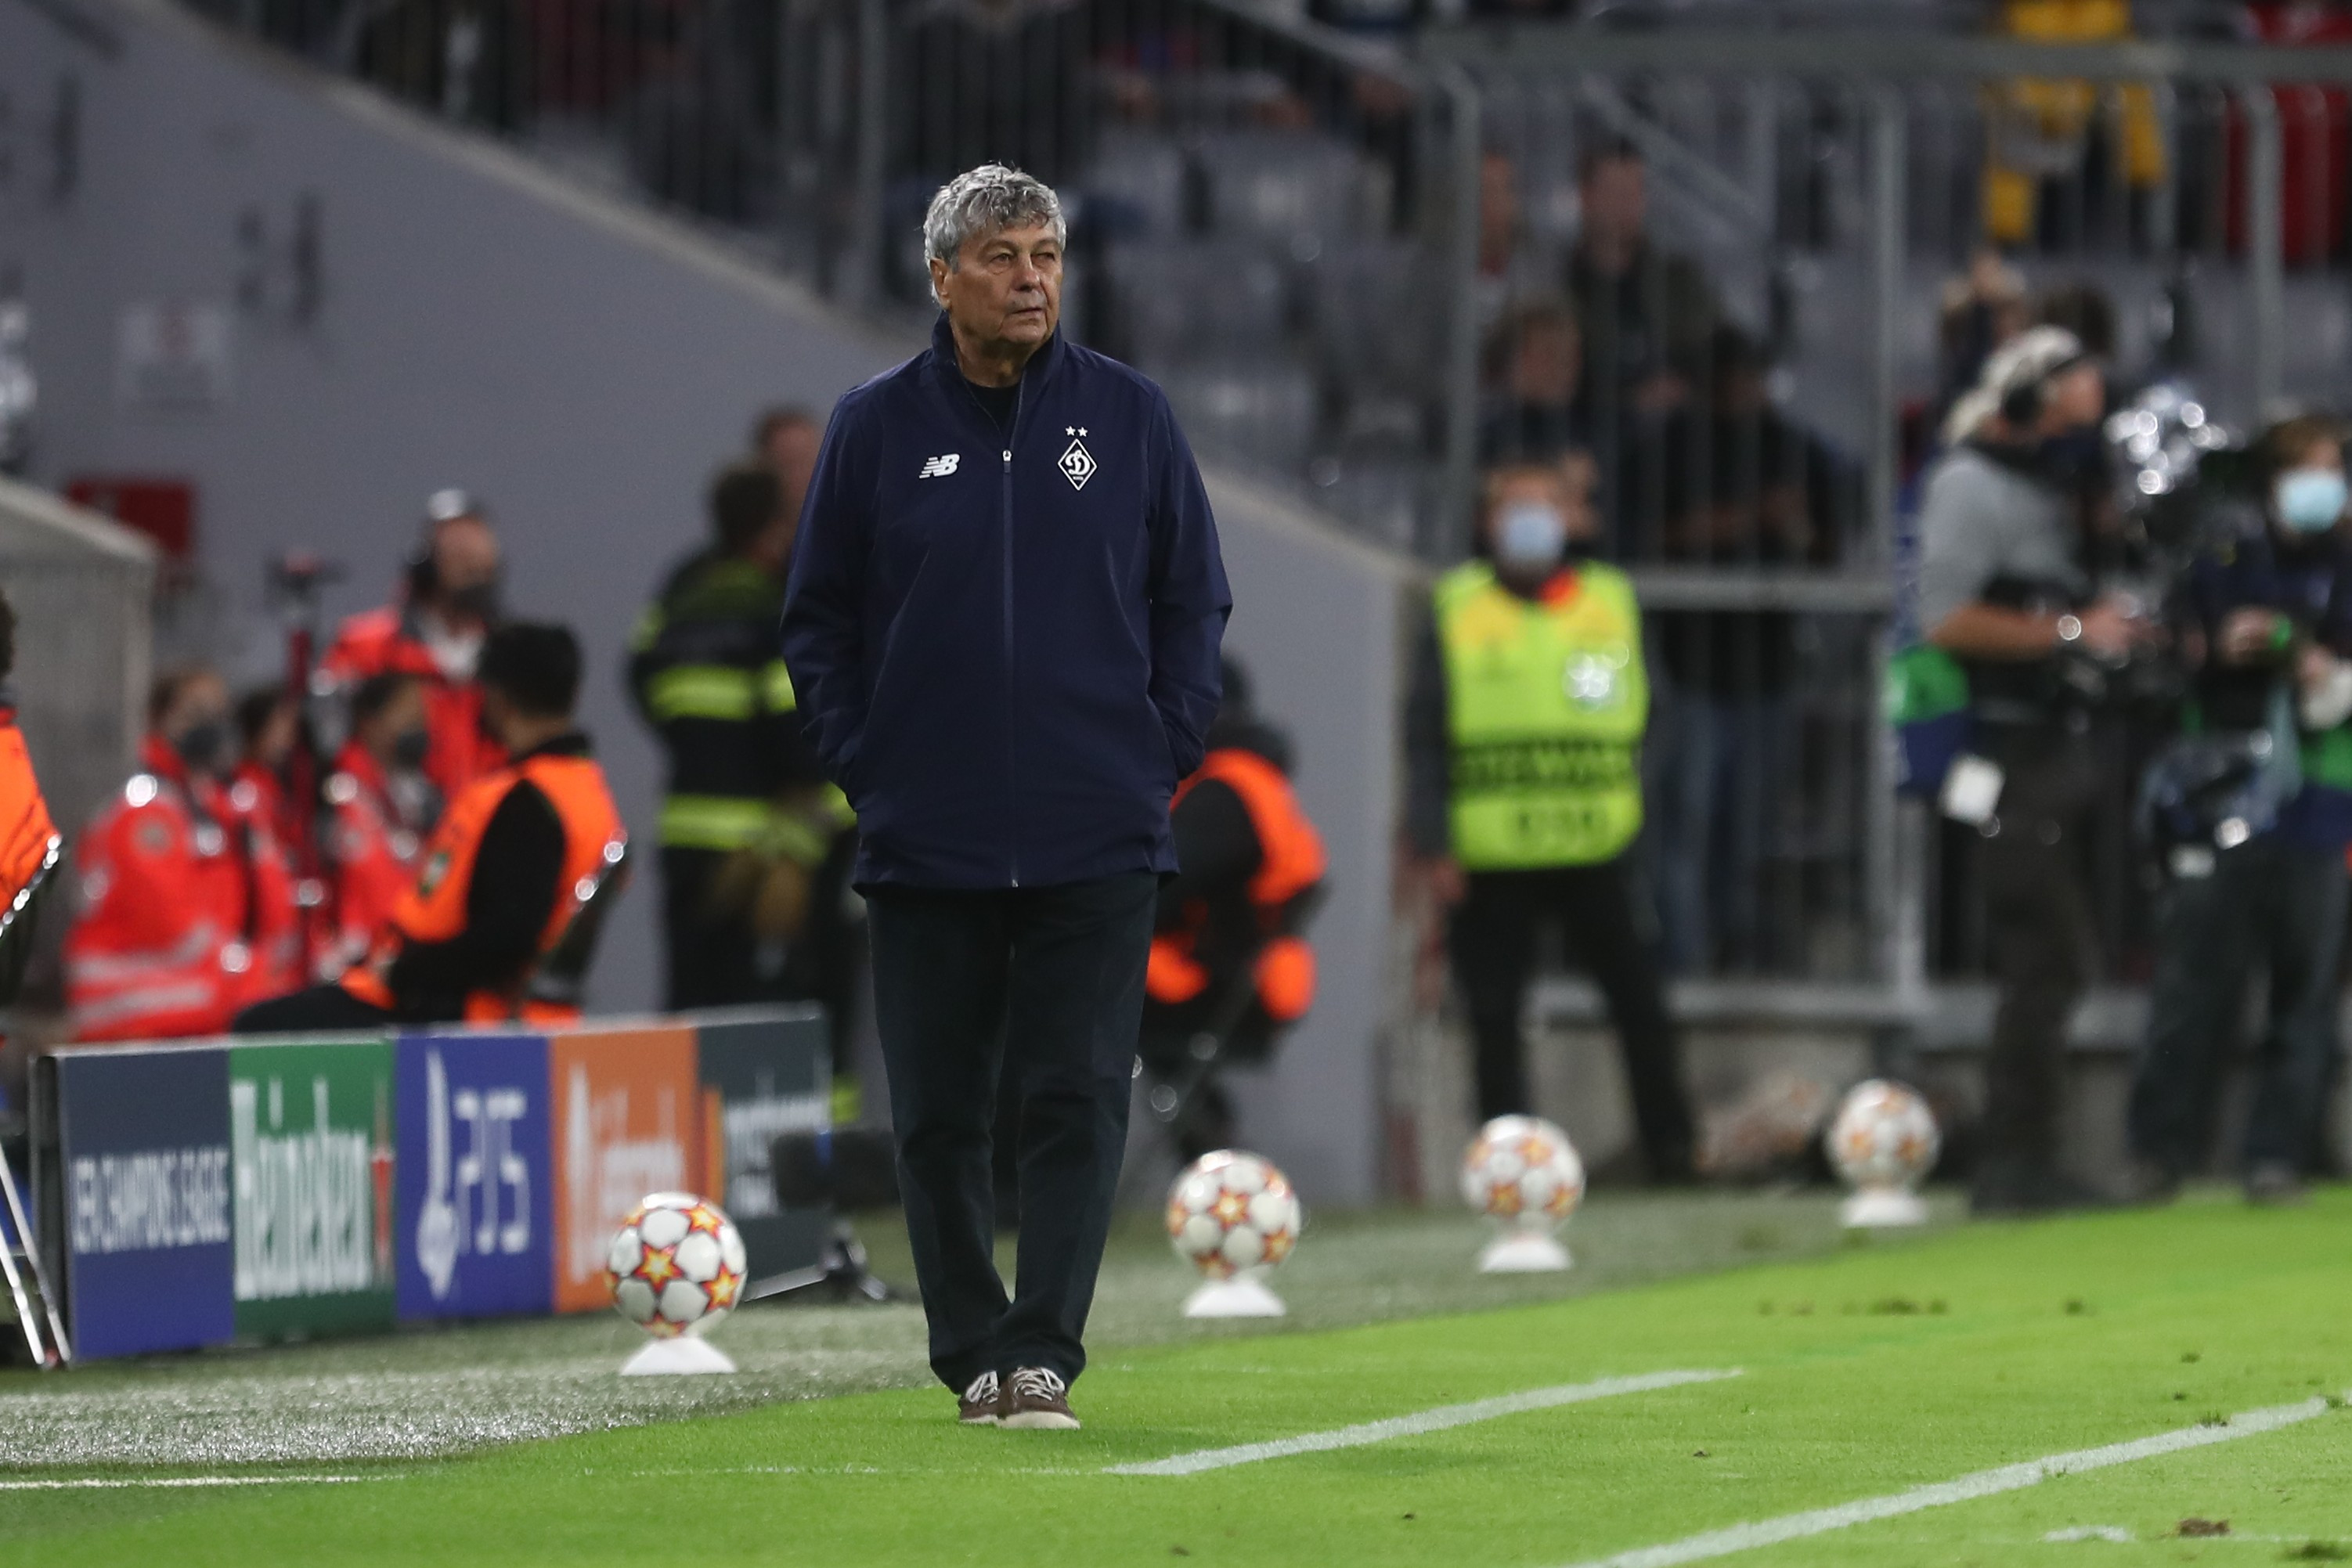 Mircea Lucescu: “I hope this match will be a good lesson for our players”